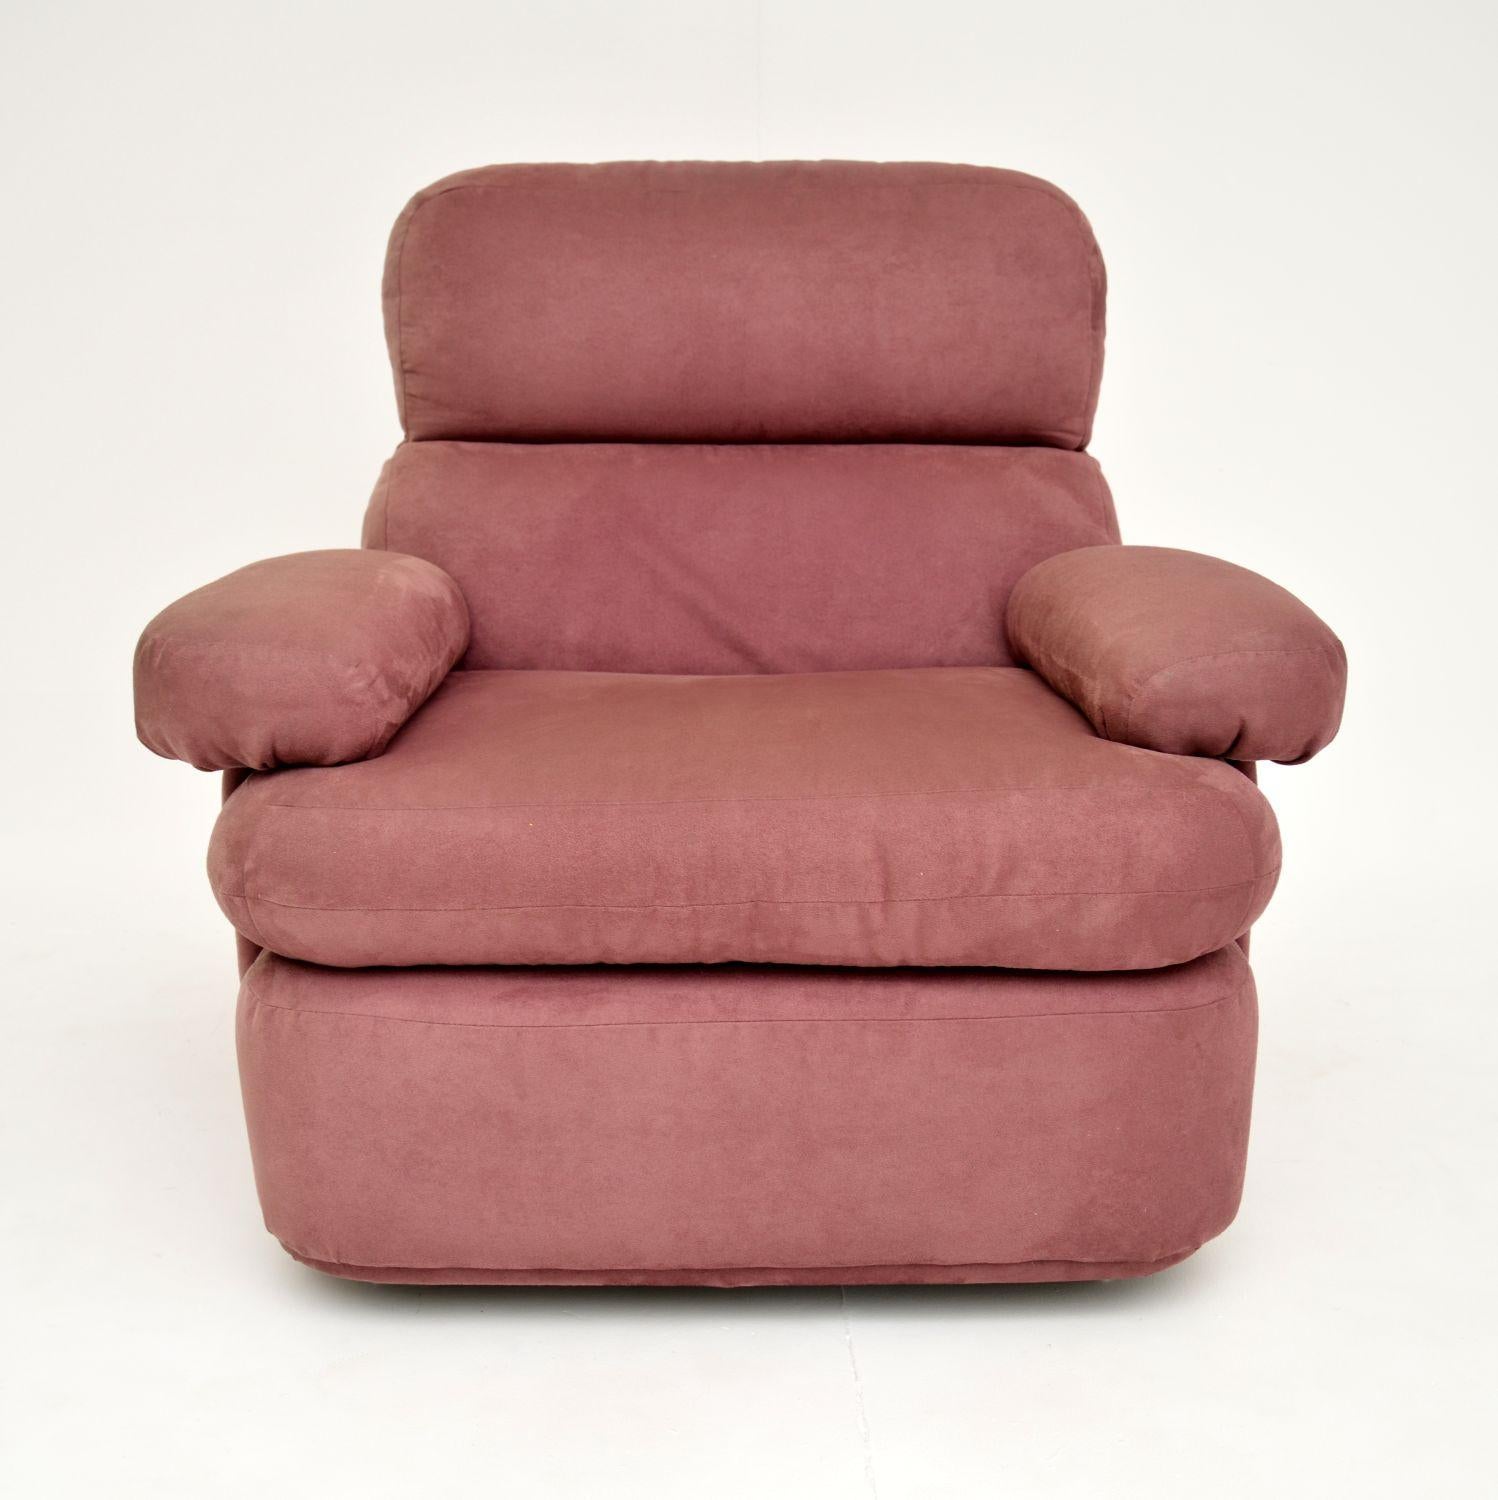 A very stylish and extremely comfortable 1970’s vintage lilac suede lounge armchair upholstered in a gorgeous lilac suede fabric. This was made in England, it dates from the 1970’s.

The quality is amazing, this is a generous size and has a superb